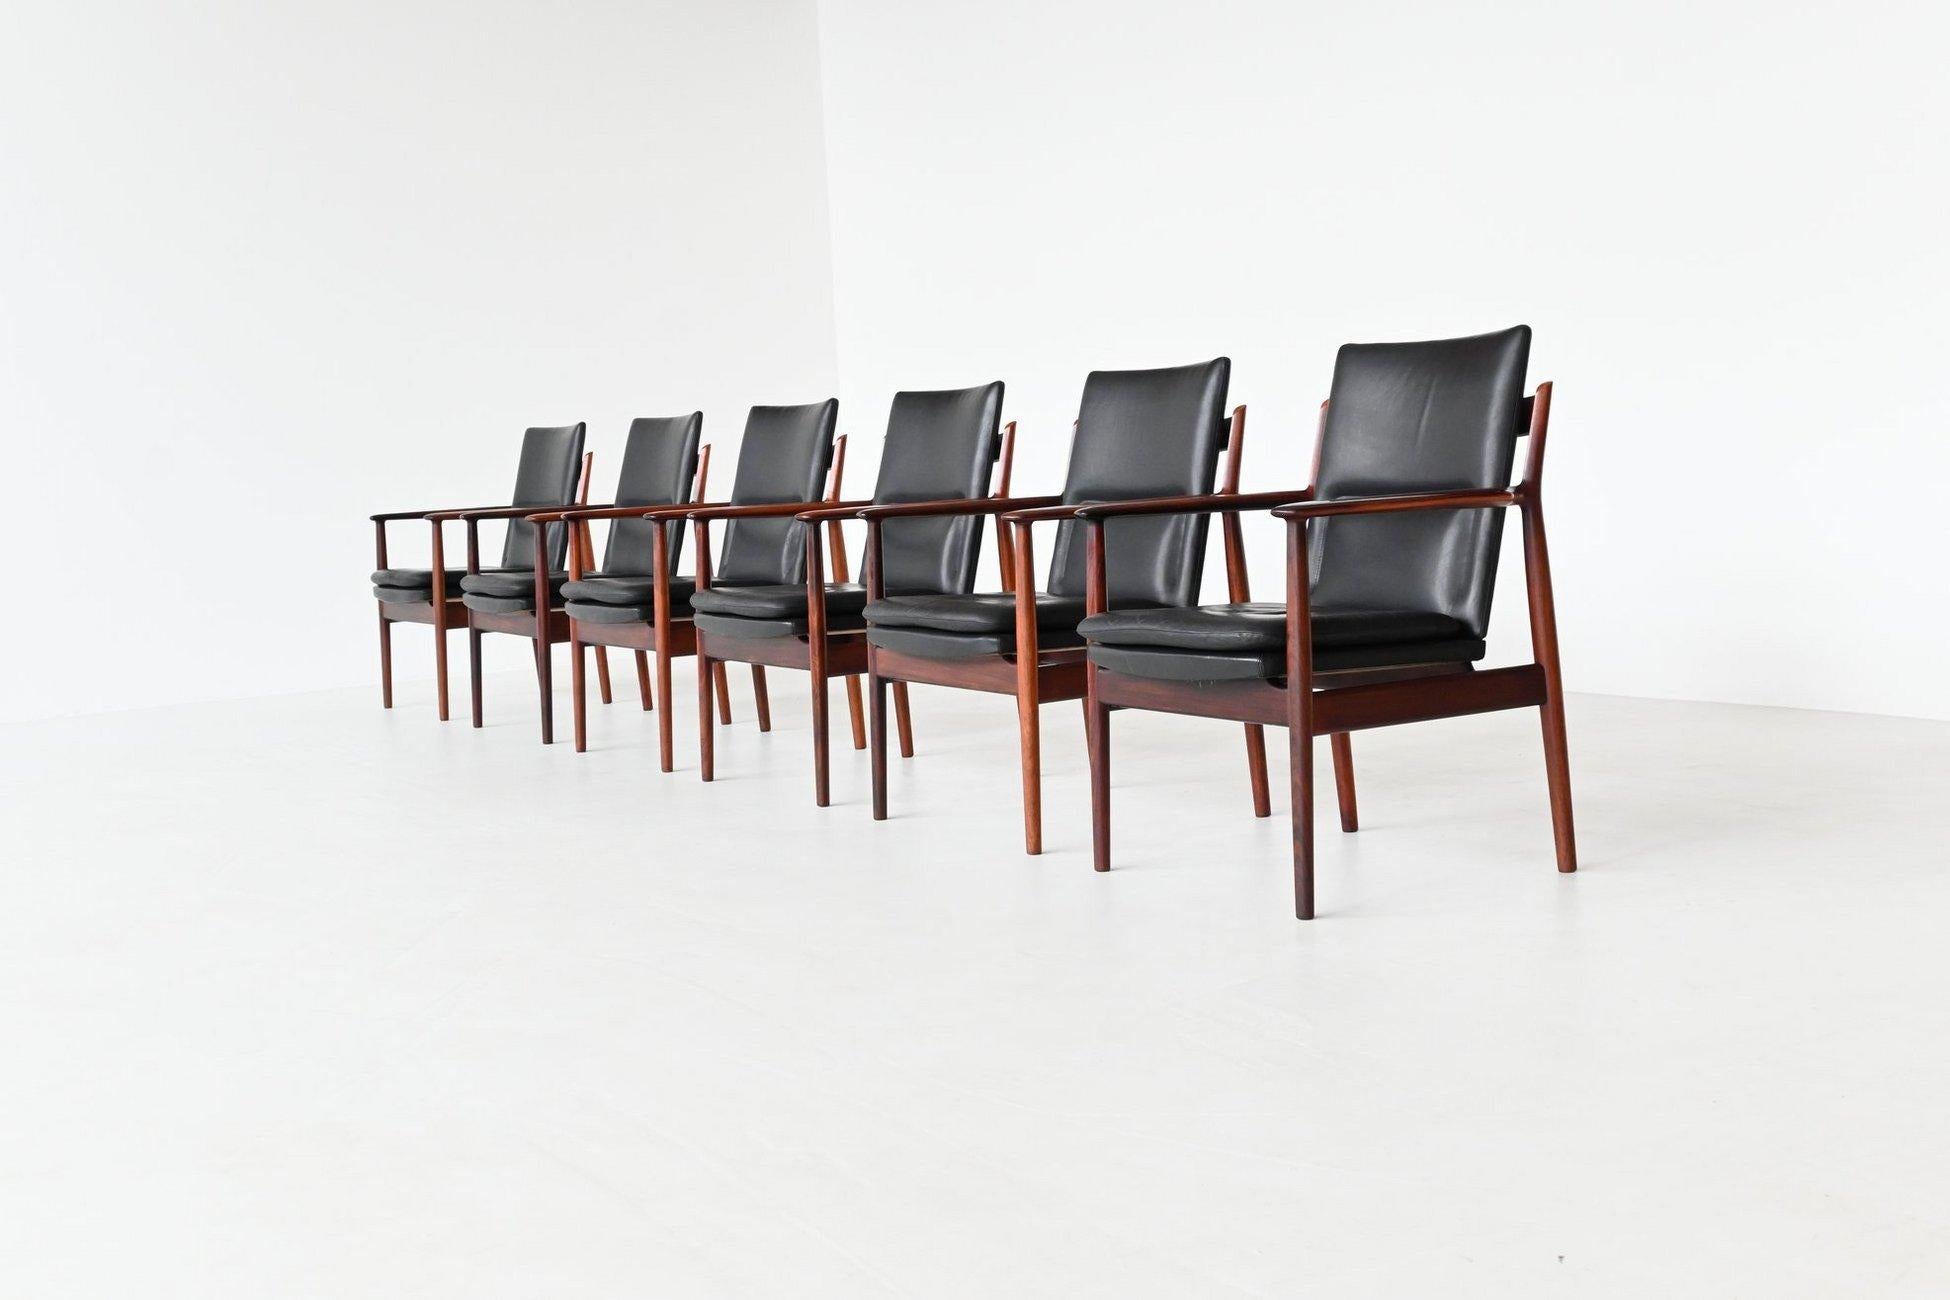 Beautiful and rare set of six armchairs model 432 designed by Arne Vodder for Sibast Furniture, Denmark 1960. This Danish design exclusive chair has sculptural rosewood armrests. The solid rosewood frame and original patinated black leather seating